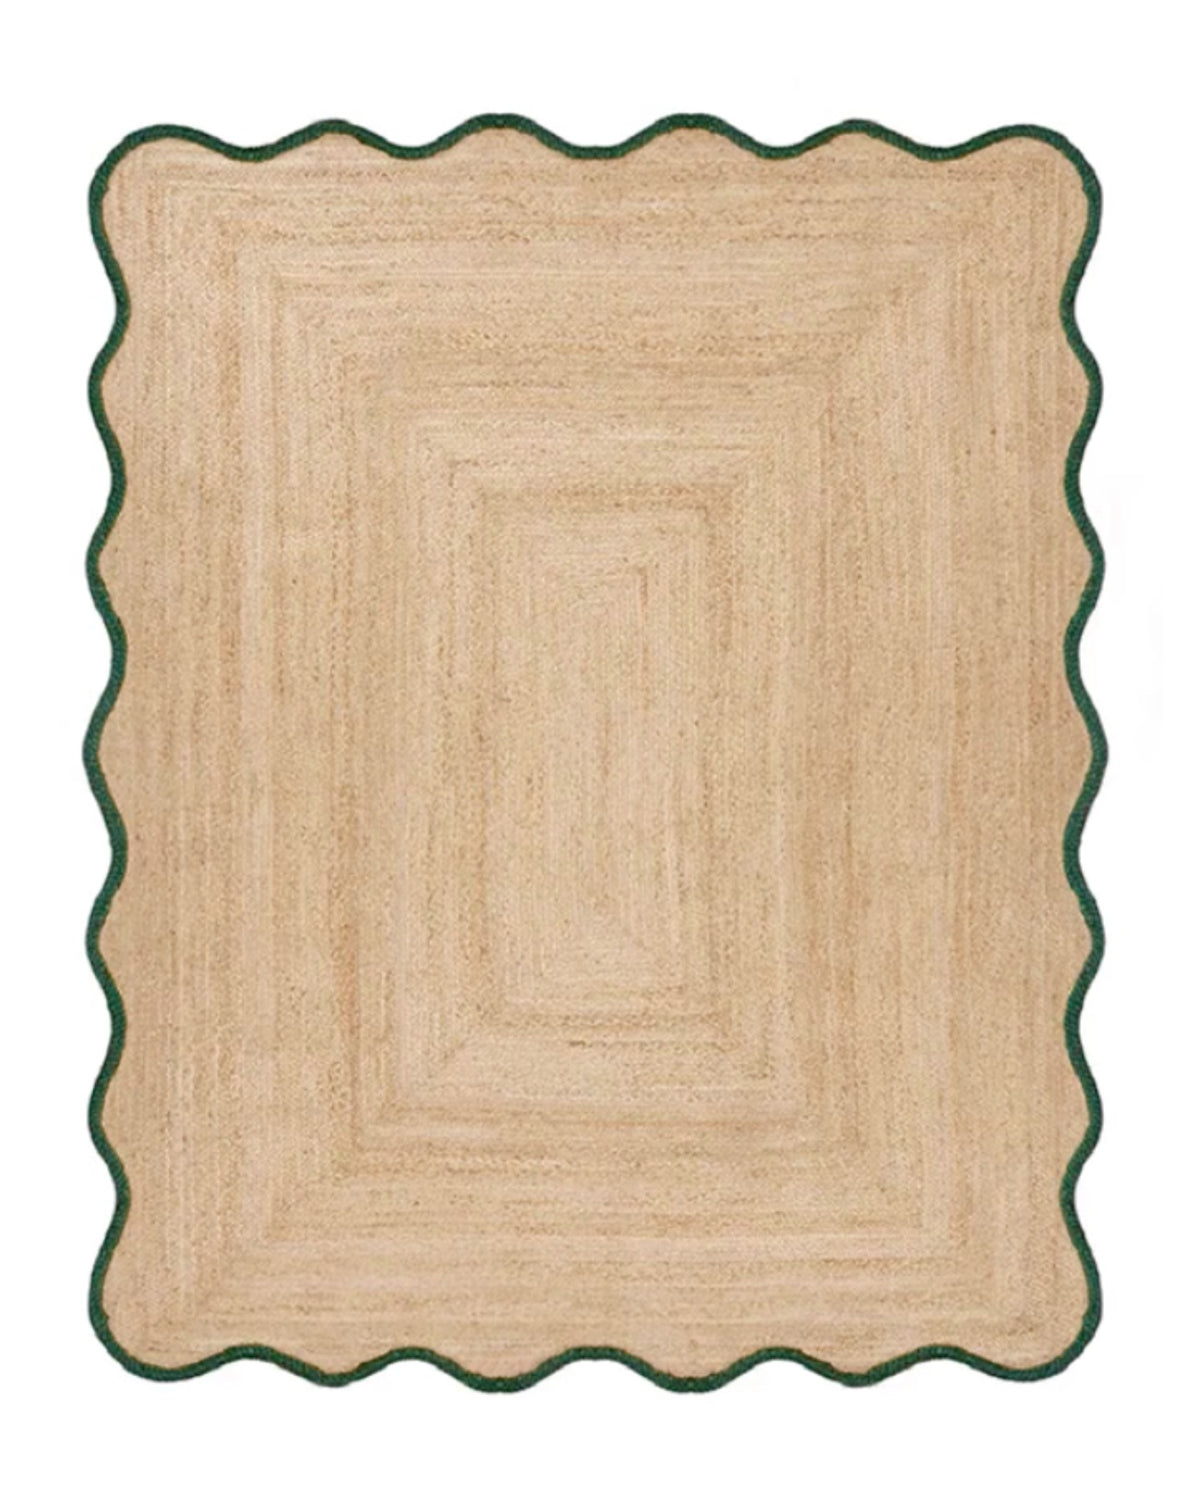 These rugs create such a beautiful finish to any kid's bedroom. 100% Jute and hard wearing they feature a beuatiful coloured border to match the colour of your childs room. Whether it be a bedroom playroom or study room, these rugs are so versatifle and come in a great range of colours and sizes.